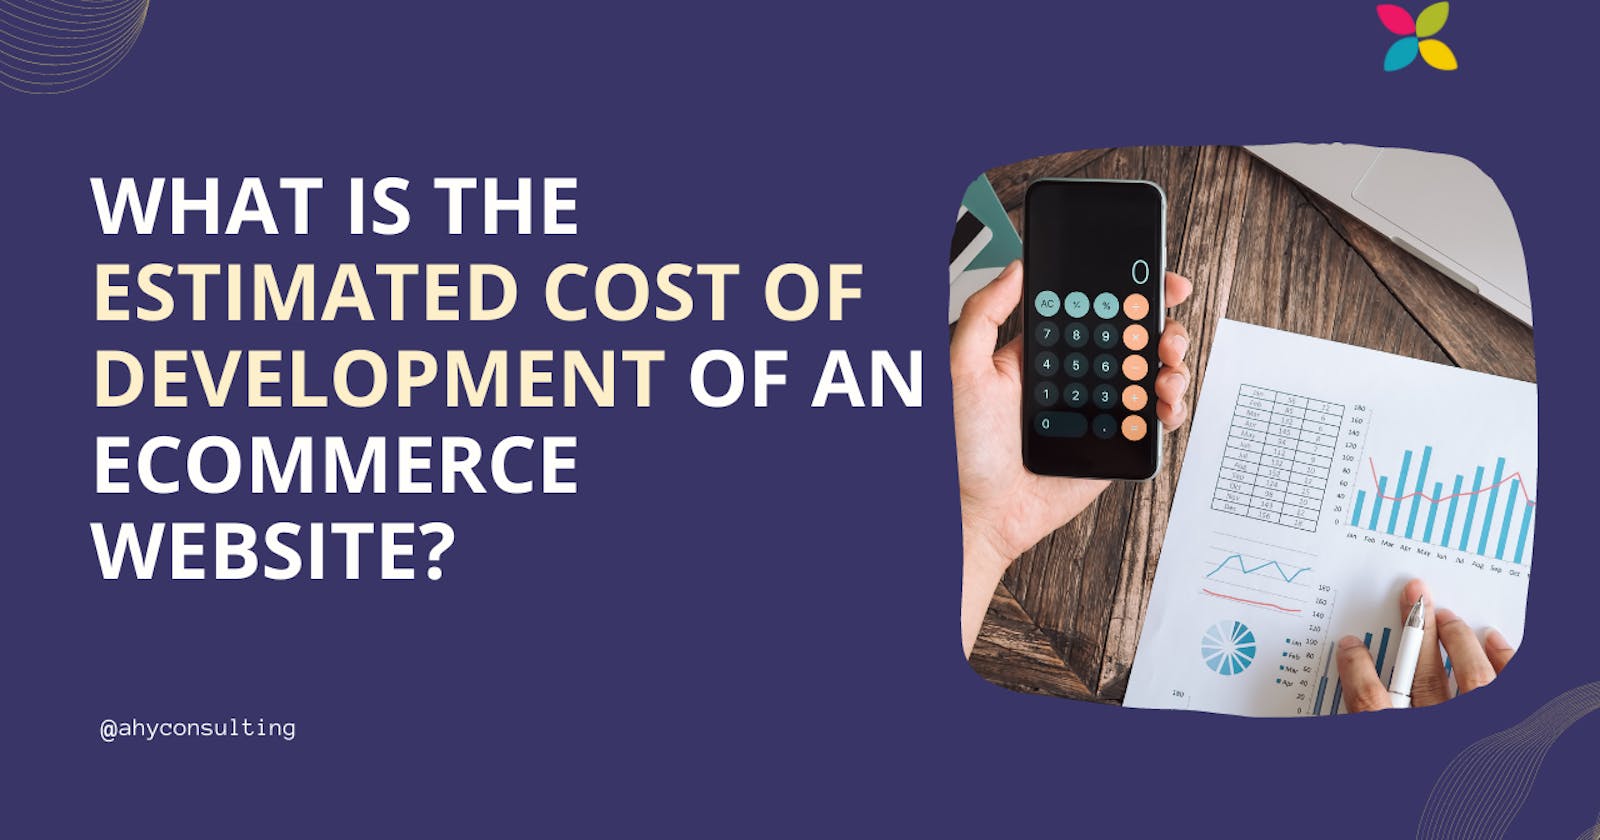 What is the estimated cost of development of a custom eCommerce website in 2023?